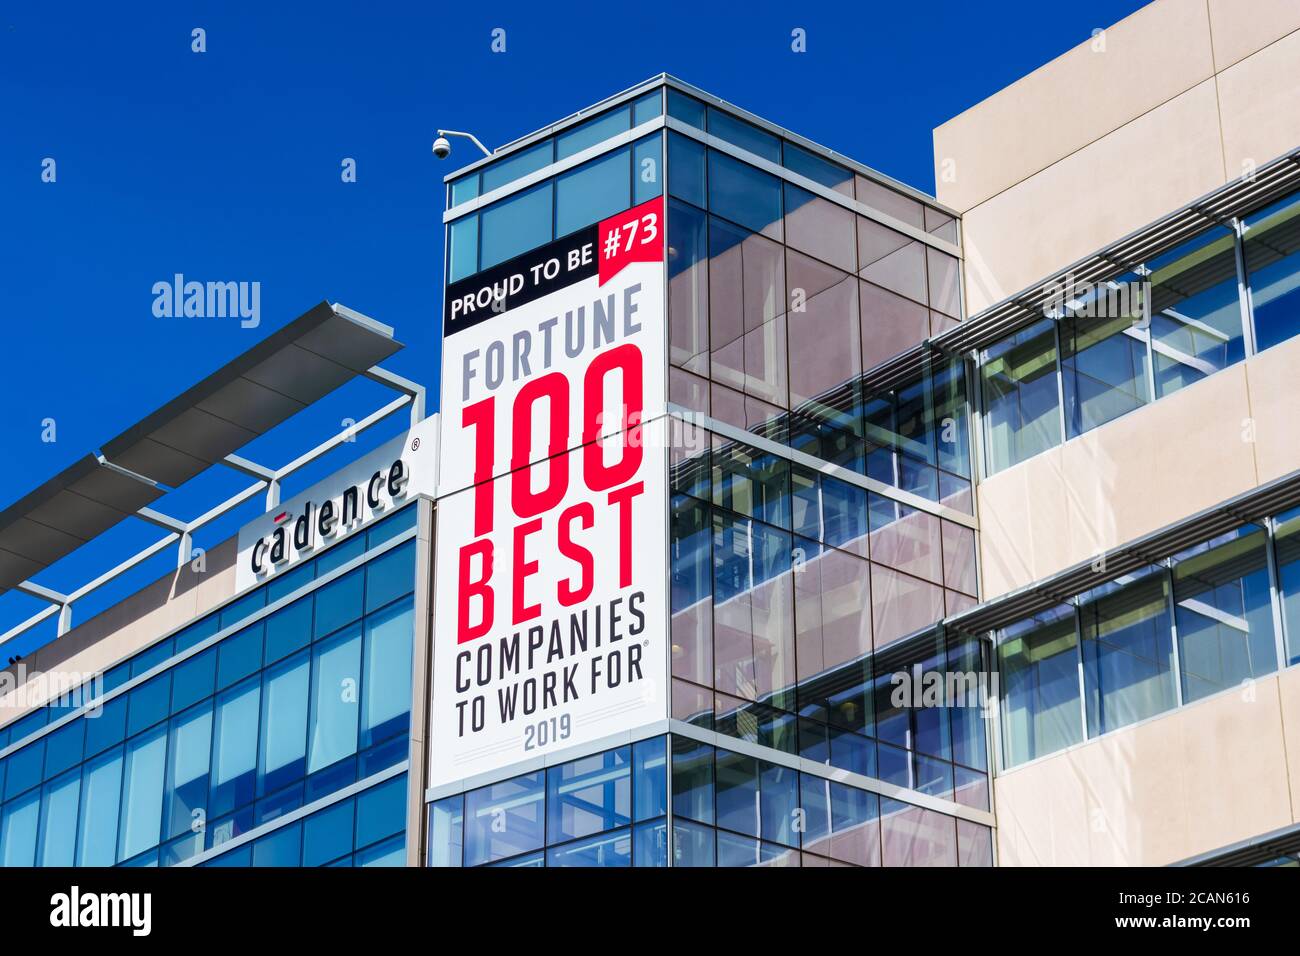 Cadence headquarters campus in Silicon Valley. Cadence Design Systems, Inc named one of the 2019 Fortune 100 best companies to work for - San Jose, Ca Stock Photo